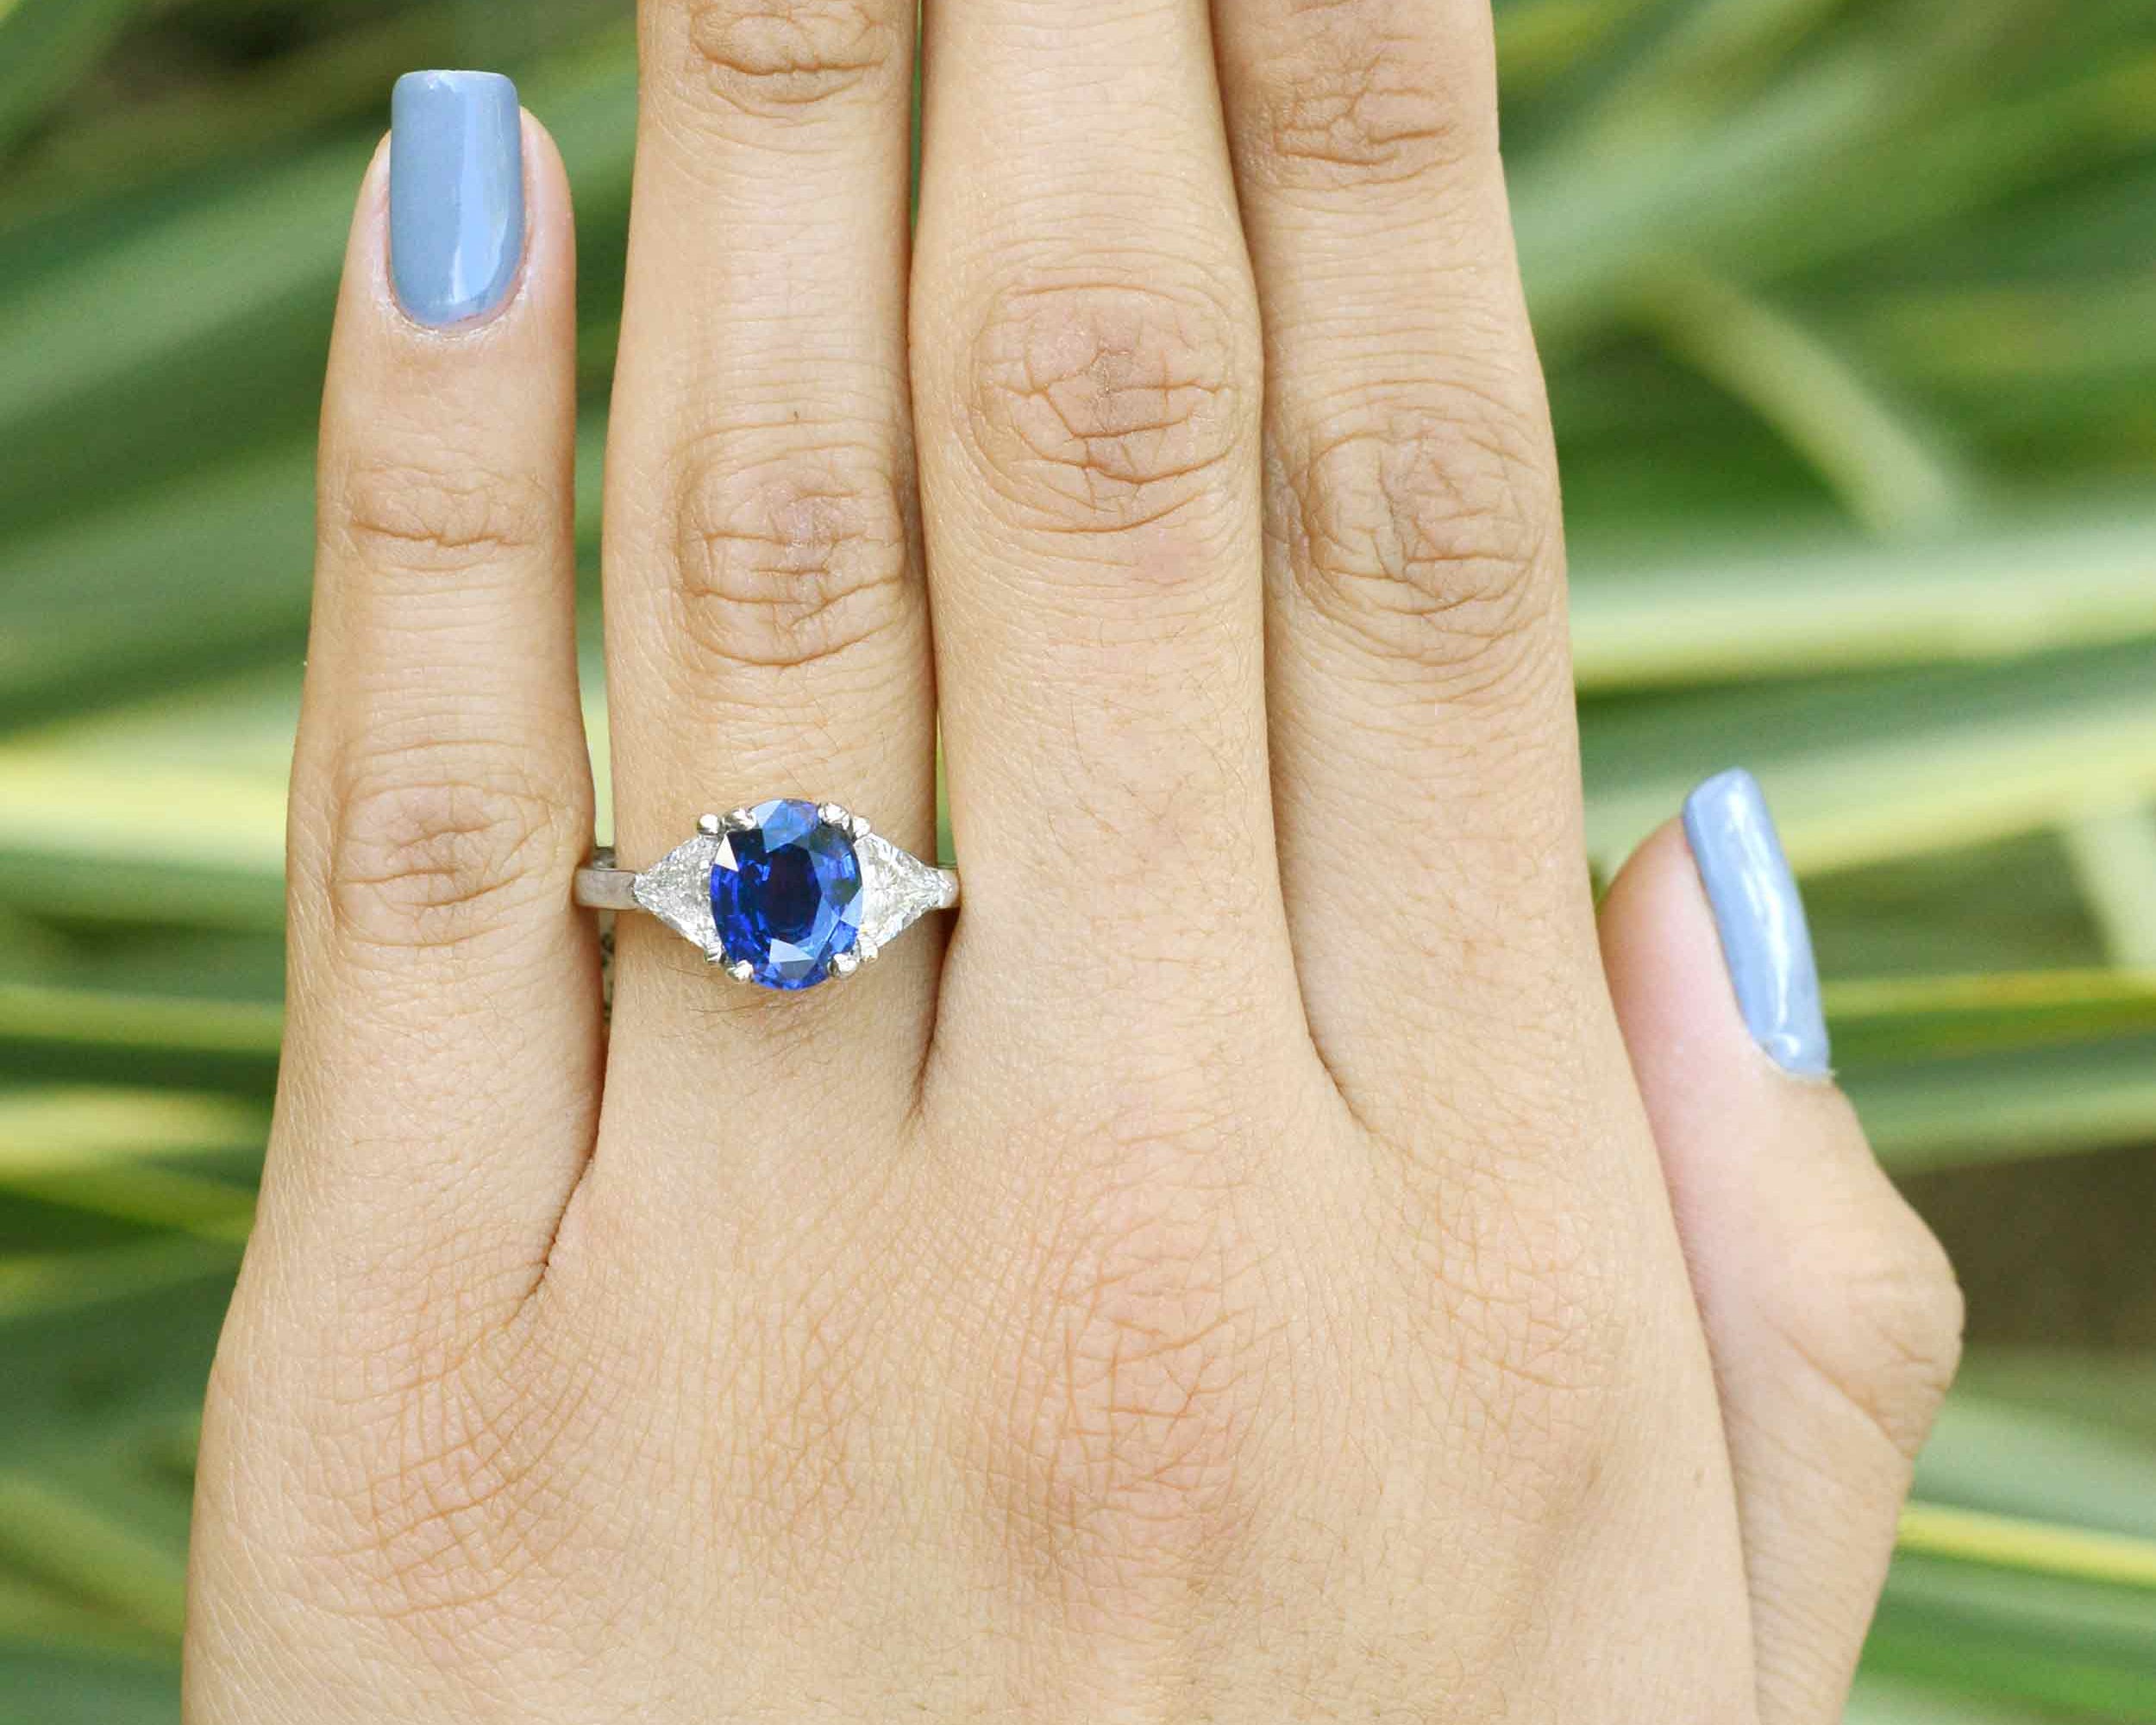 A size 6.75 diamond and blue sapphire 3 stone ring.